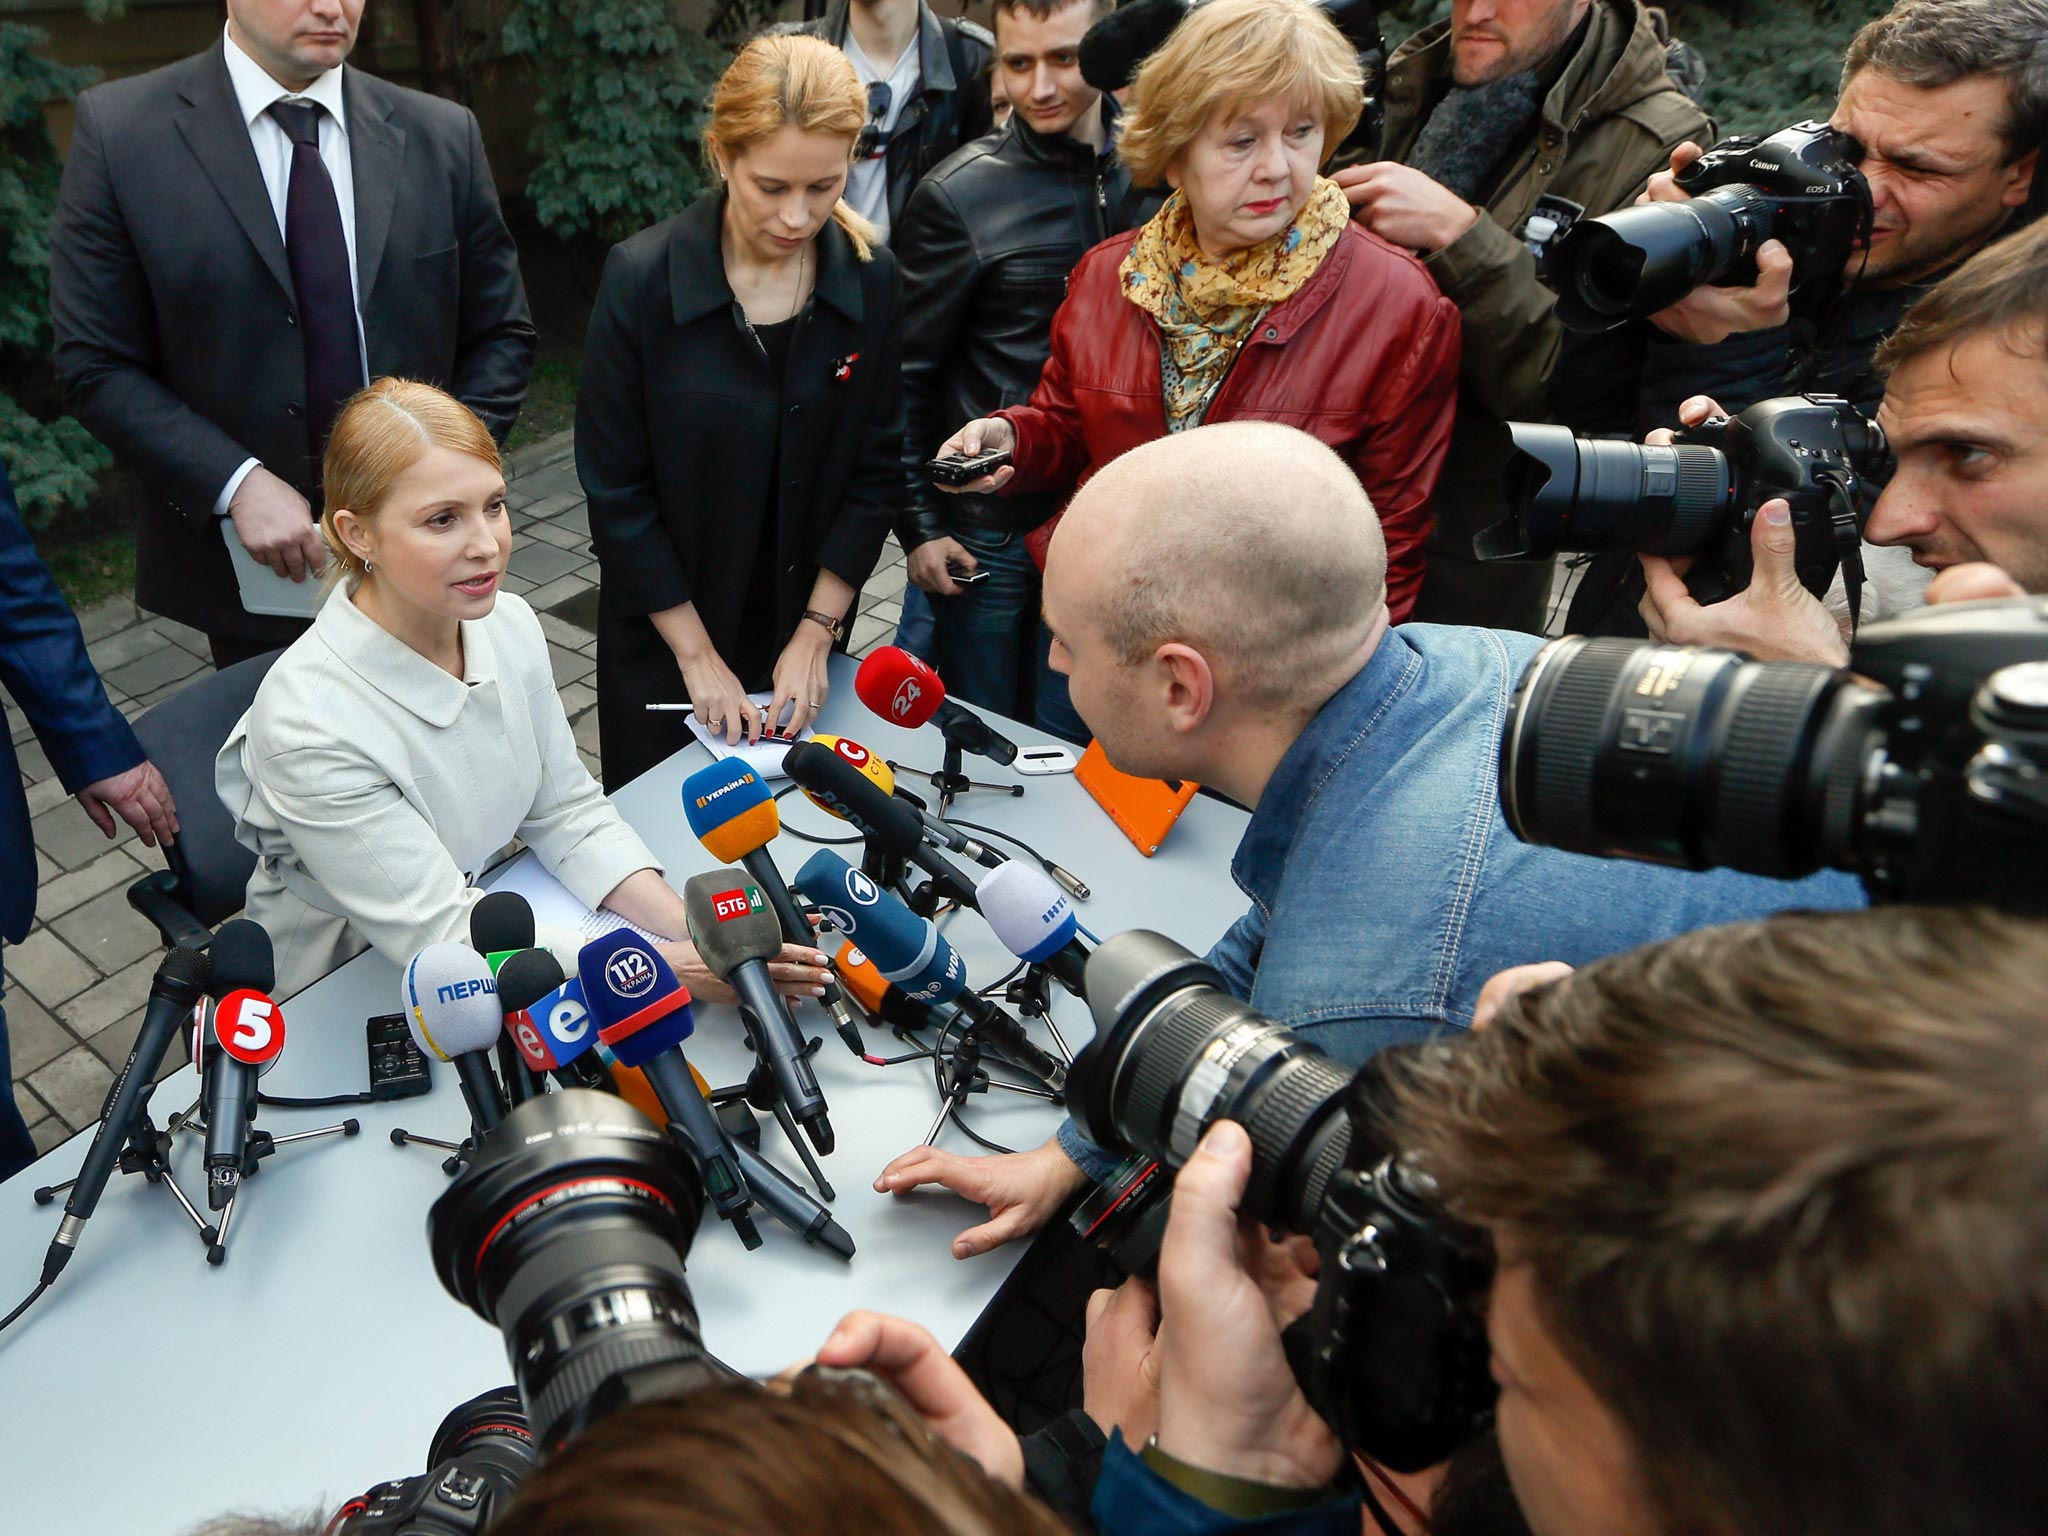 Yulia Tymoshenko (seated) at a press conference in Kiev yesterday, when she confirmed that she will run for president in Ukraine’s elections on 25 May